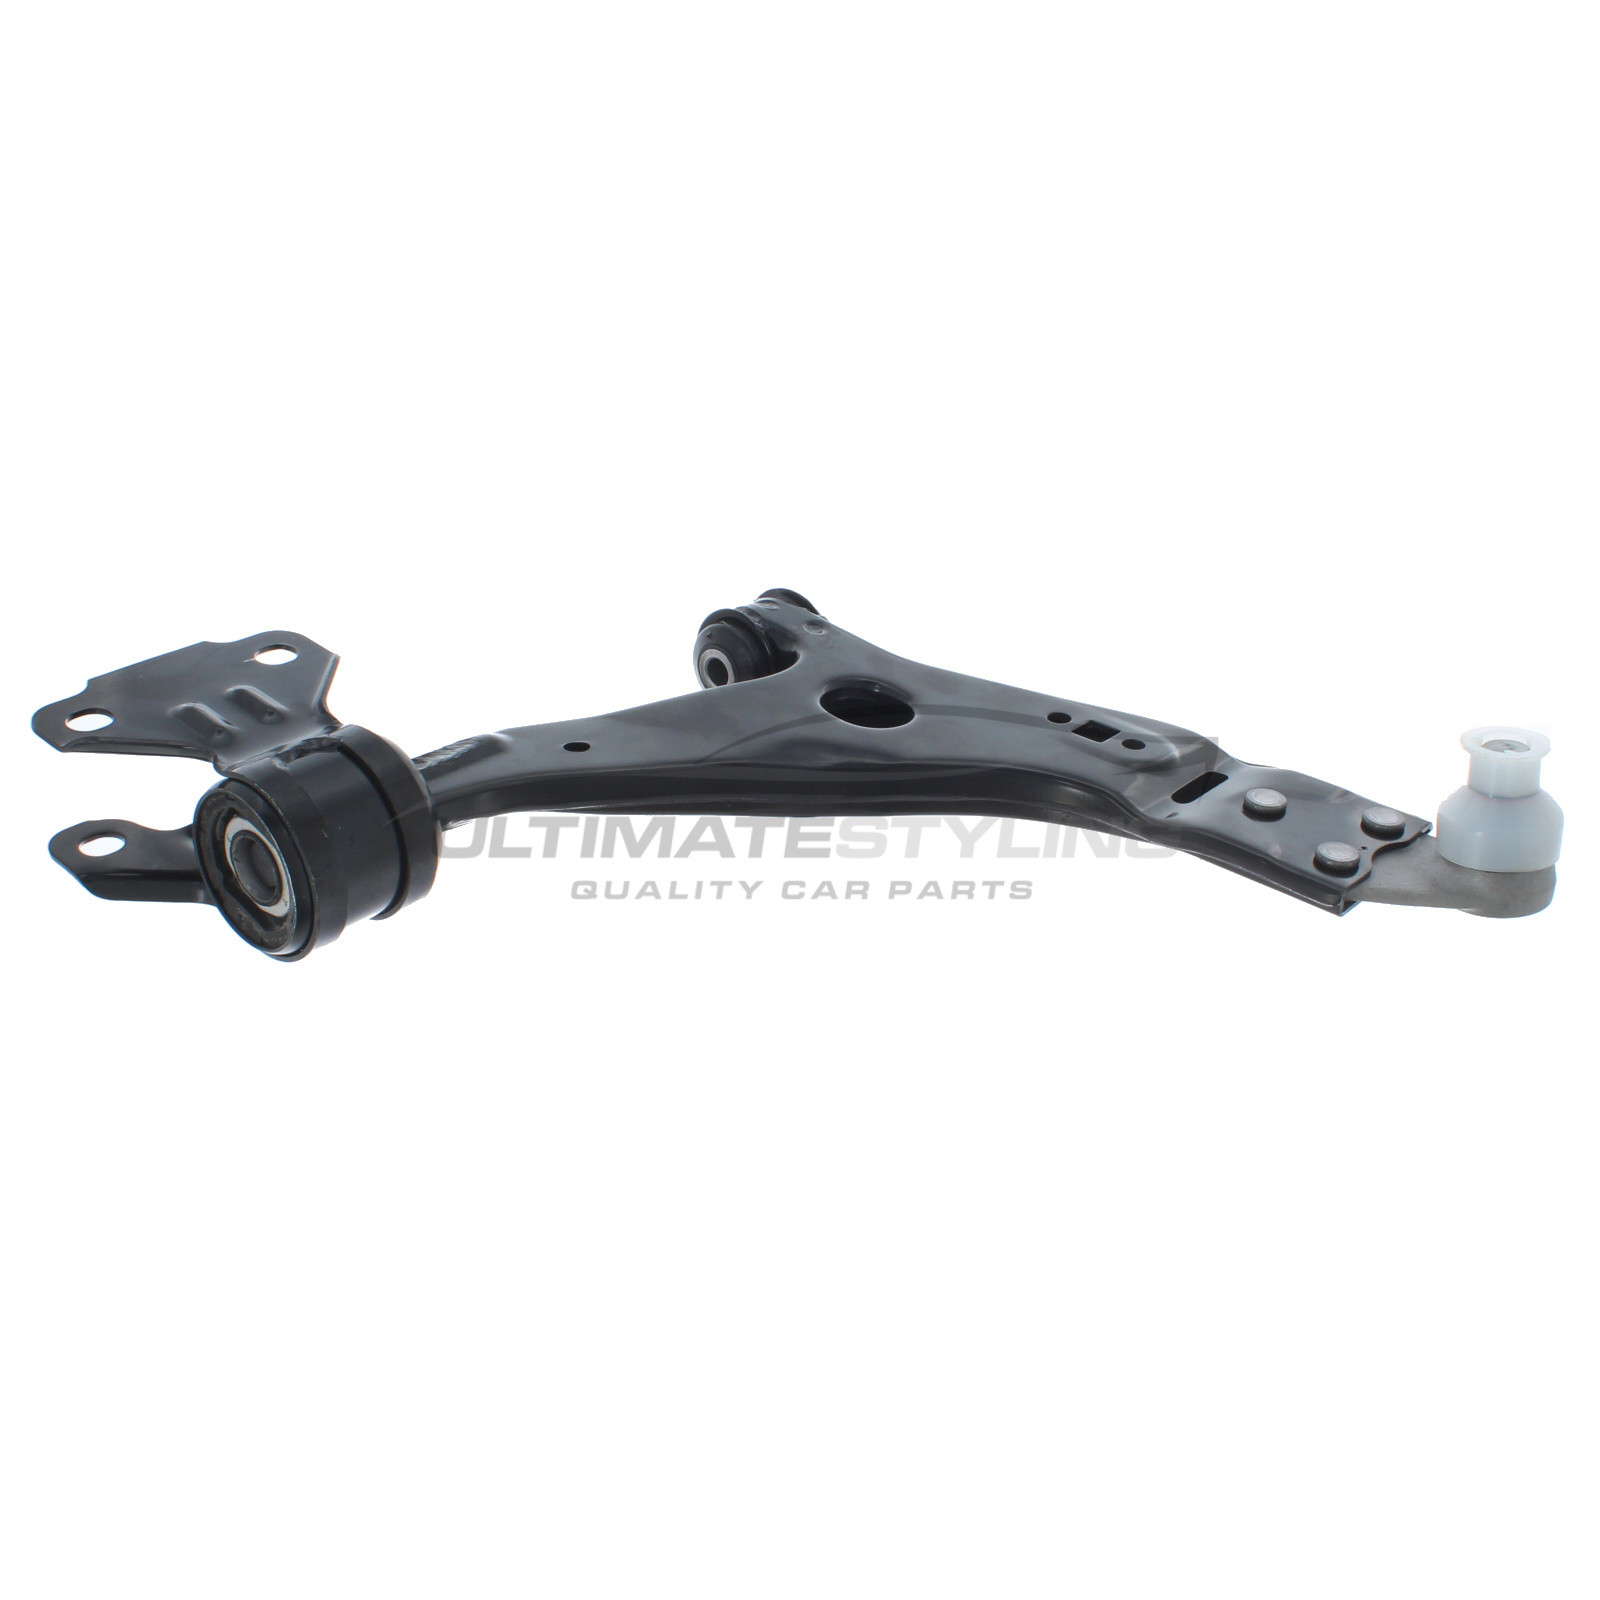 Ford Kuga 2012-2017 Front Lower Suspension Arm (Steel) Including Ball Joint and Rear Bush Driver Side (RH)